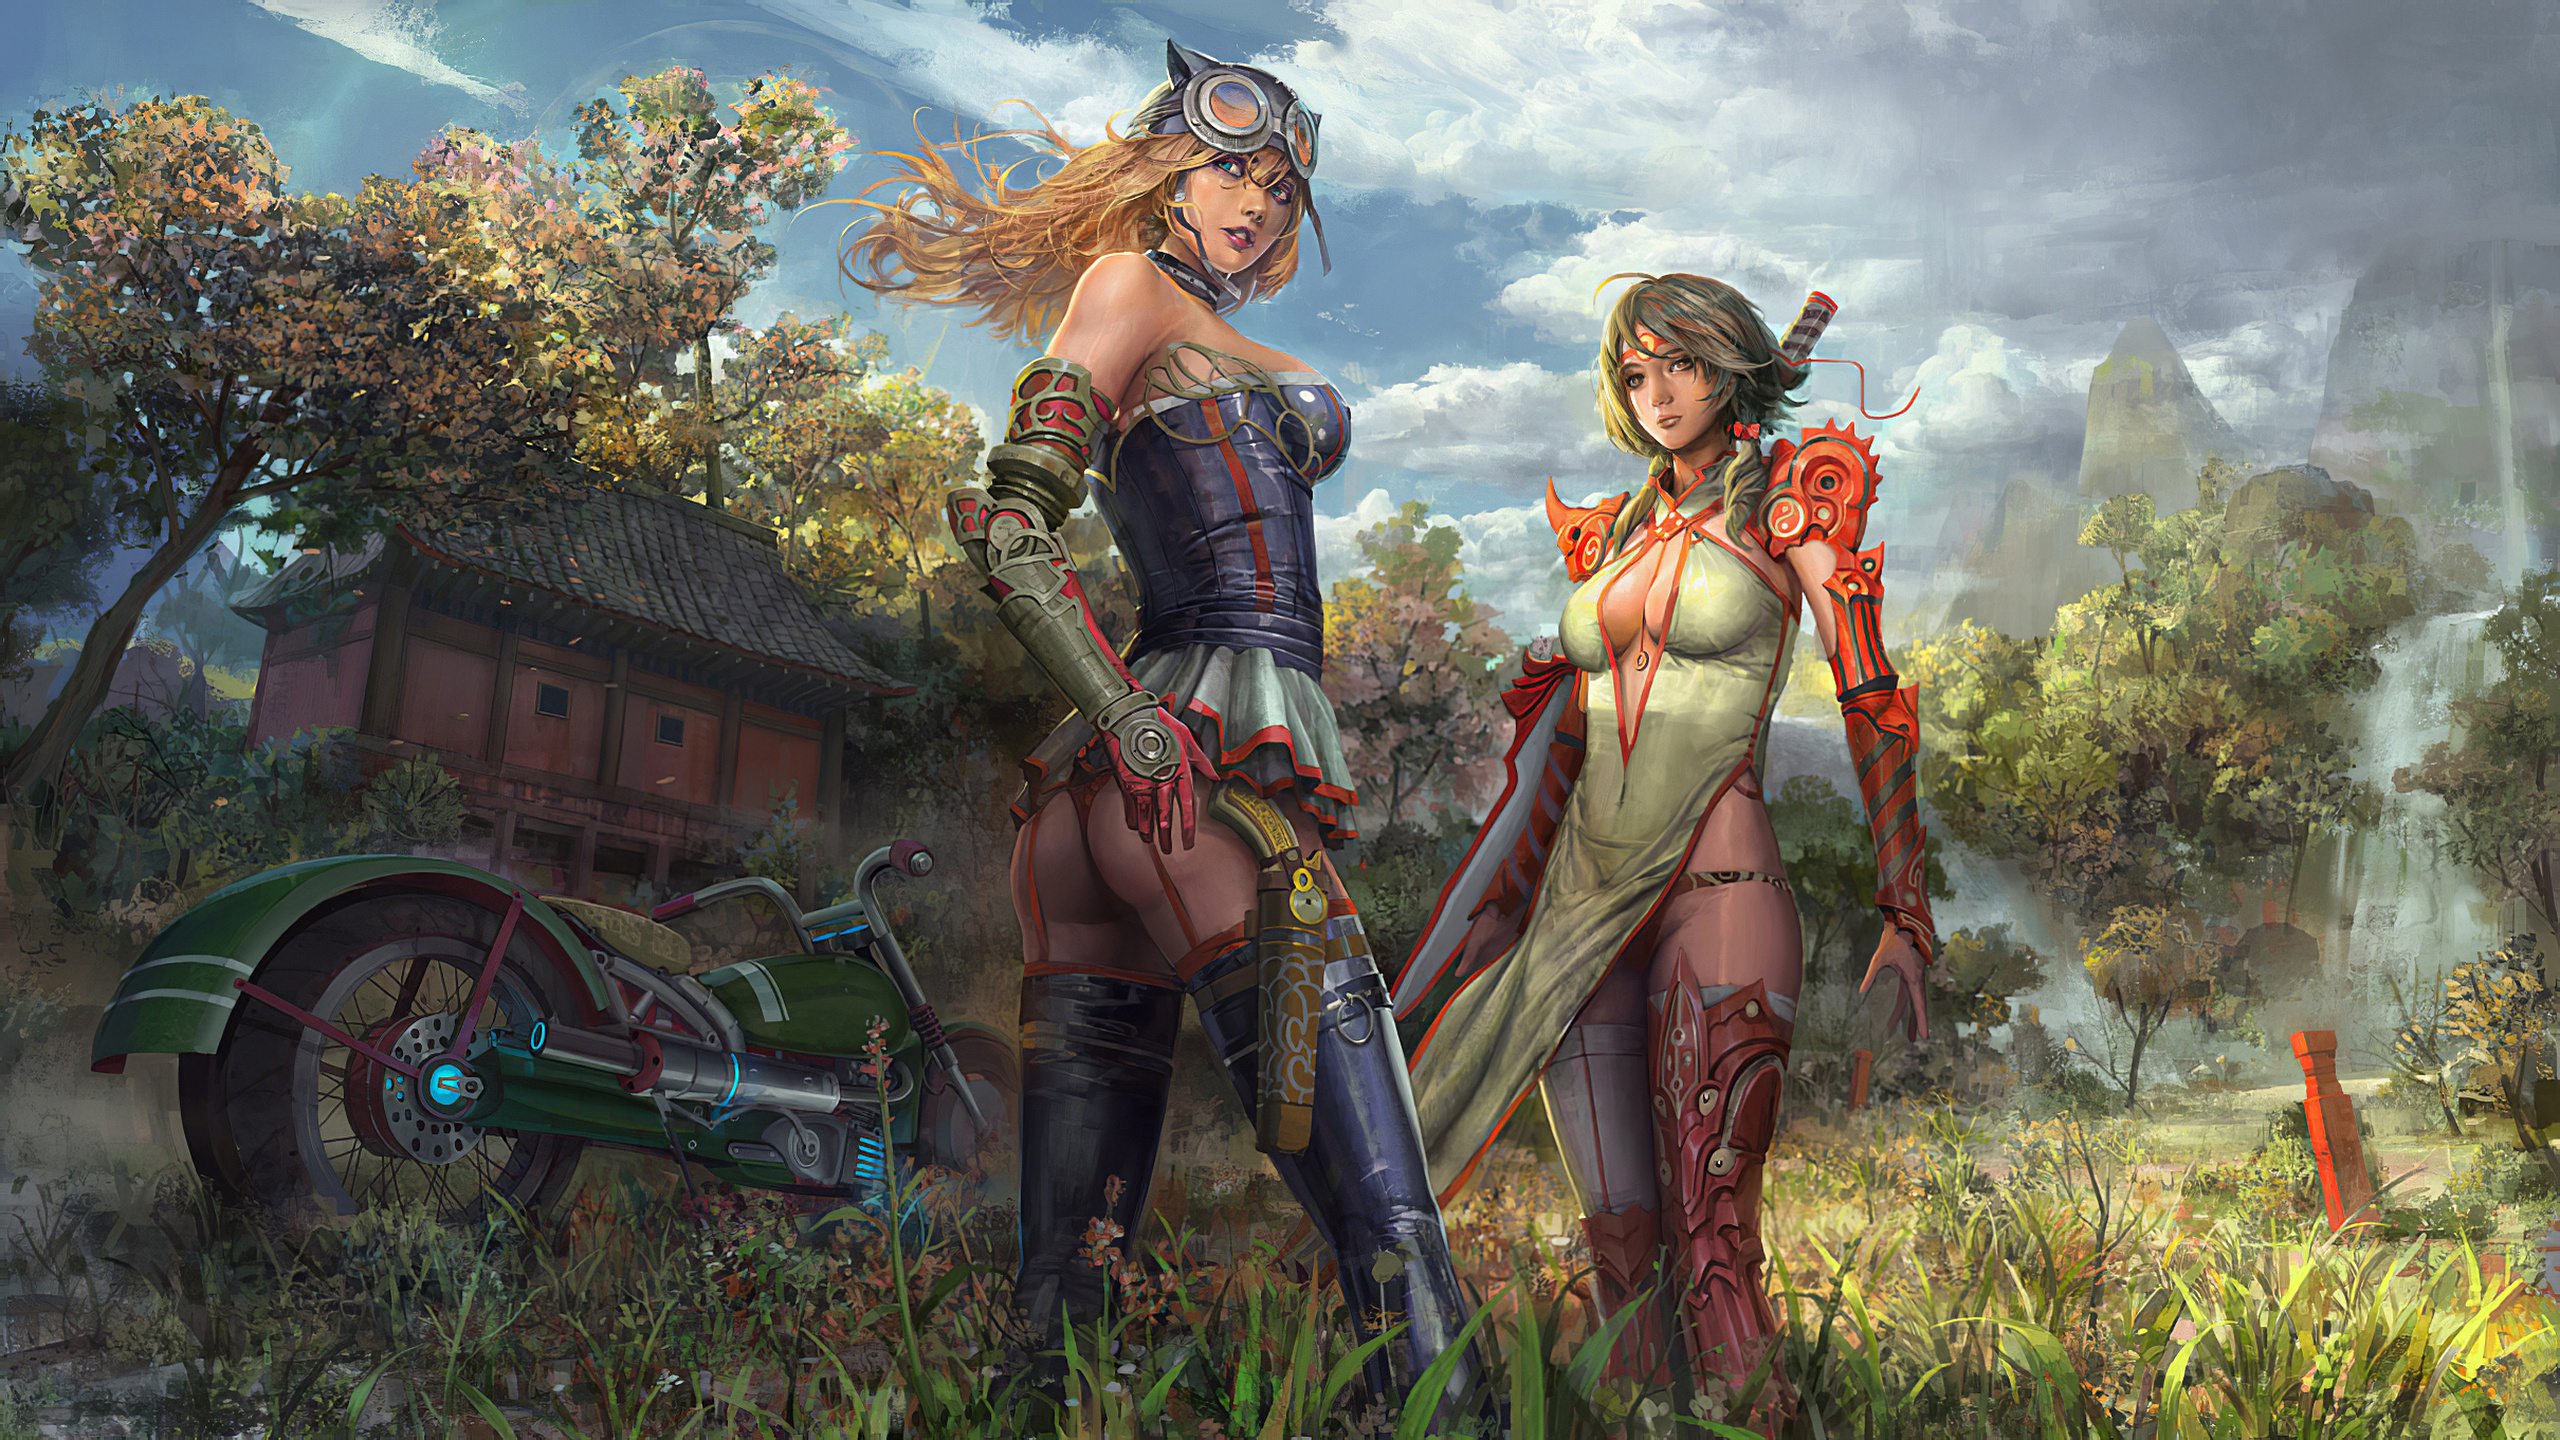 General 2560x1440 science fiction retro science fiction steampunk fantasy art machine armor digital art trees clouds daylight ass panties skimpy clothes